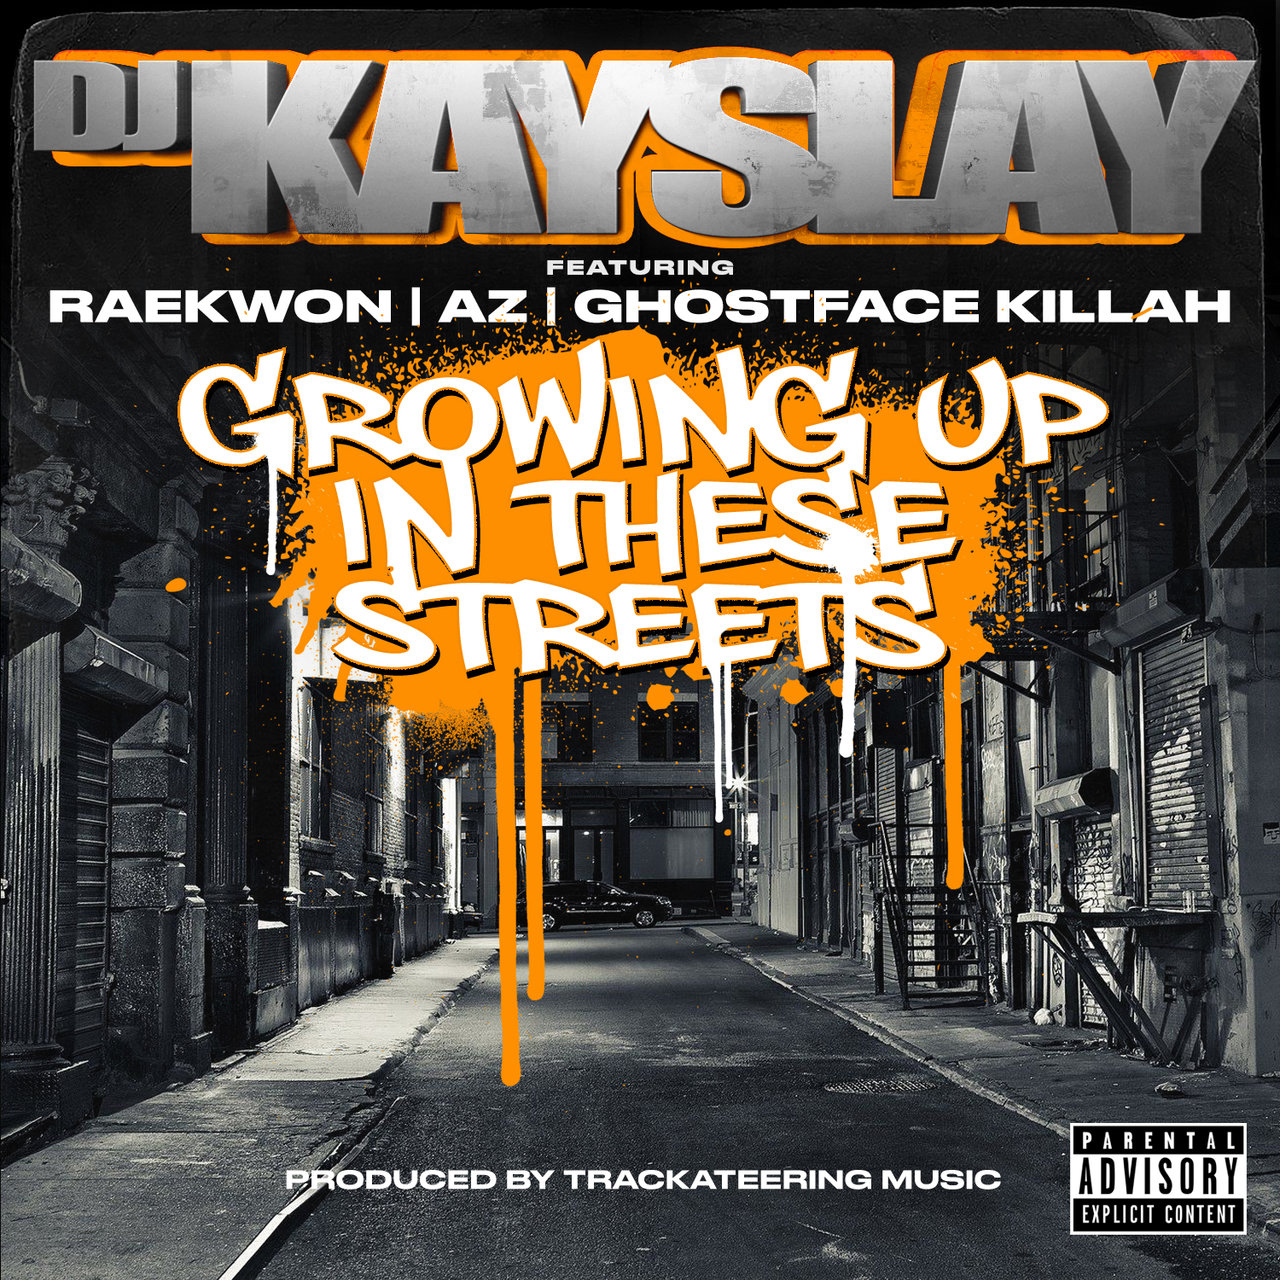 DJ Kay Slay - Growing Up In These Streets (ft. Raekwon, AZ and Ghostface Killah) (Cover)